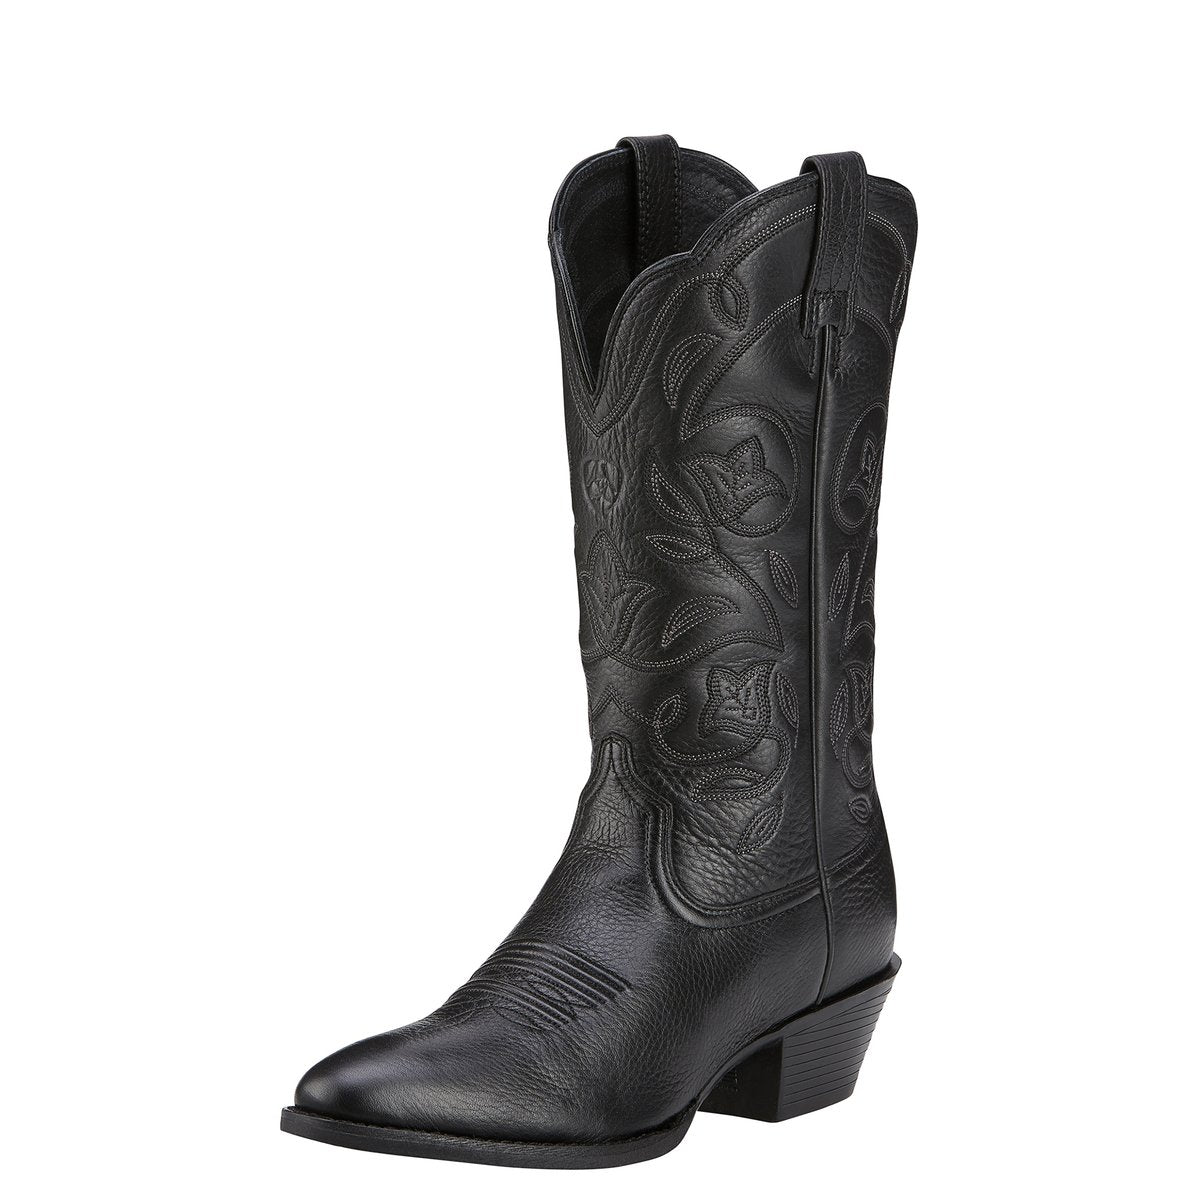 Ariat Wms Heritage Western R Toe - Mothers Day Sale